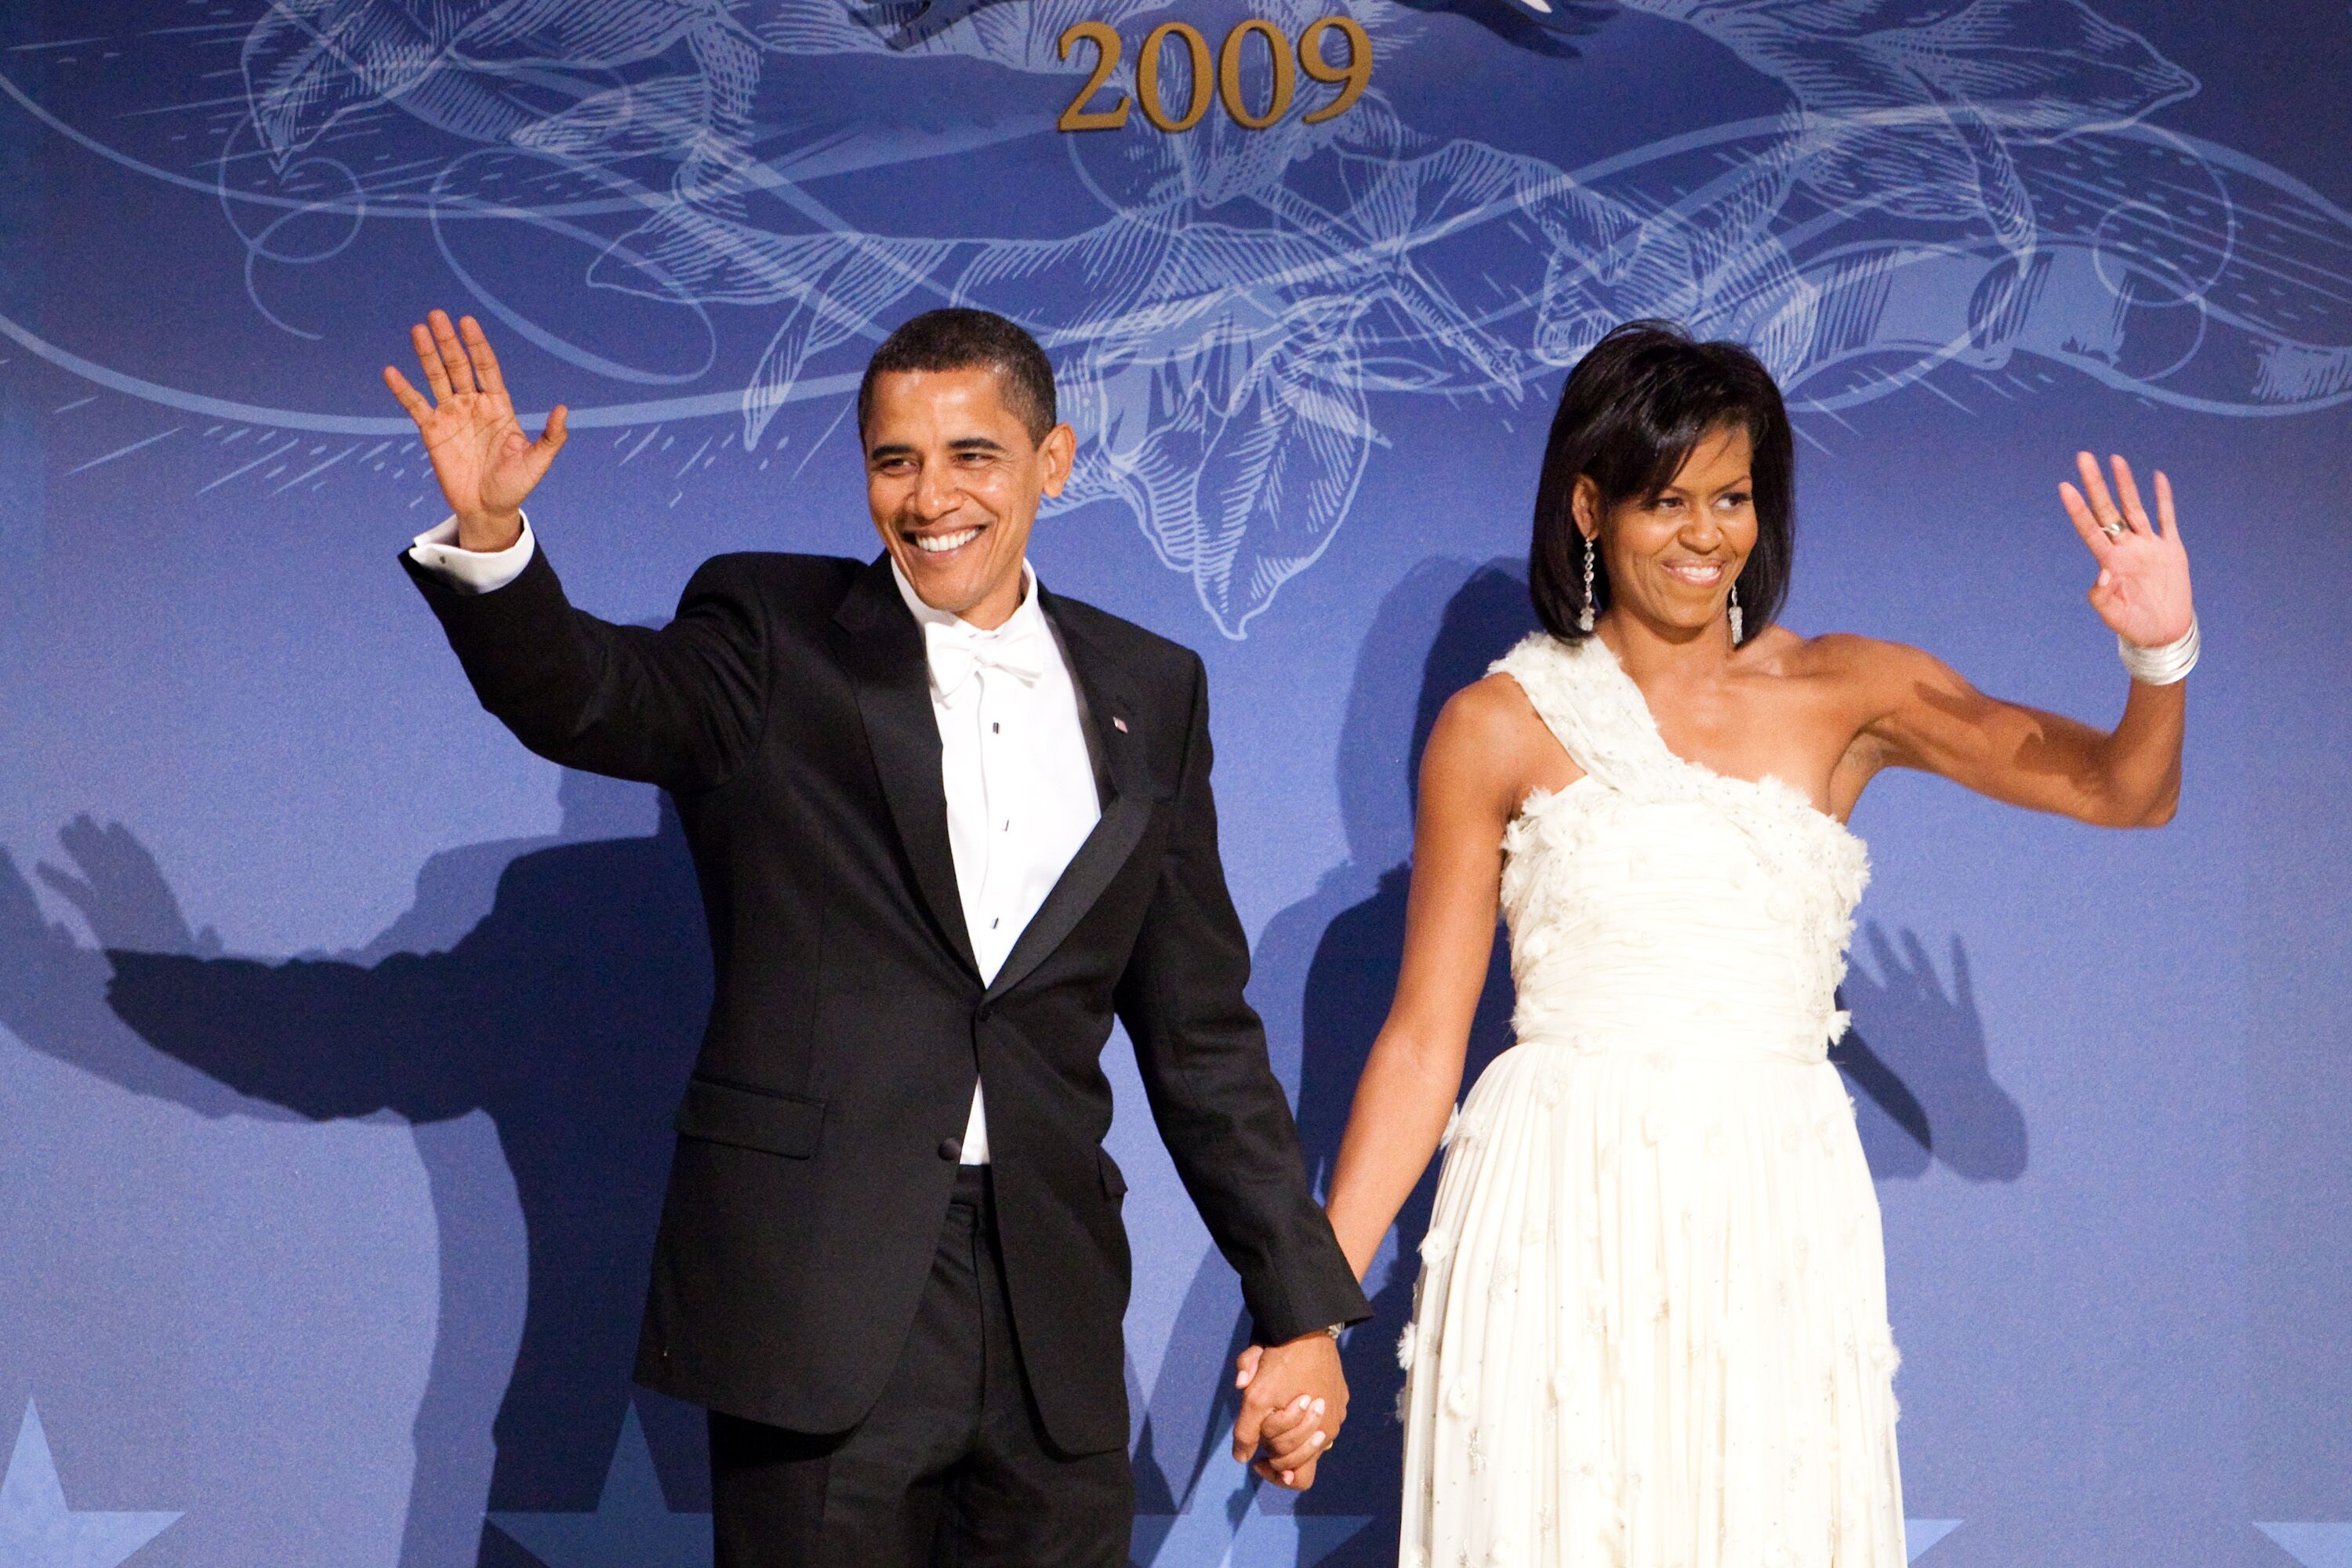 Barack and Michelle Obama at the 2009 Inaugural Ball/ Source: Getty Images